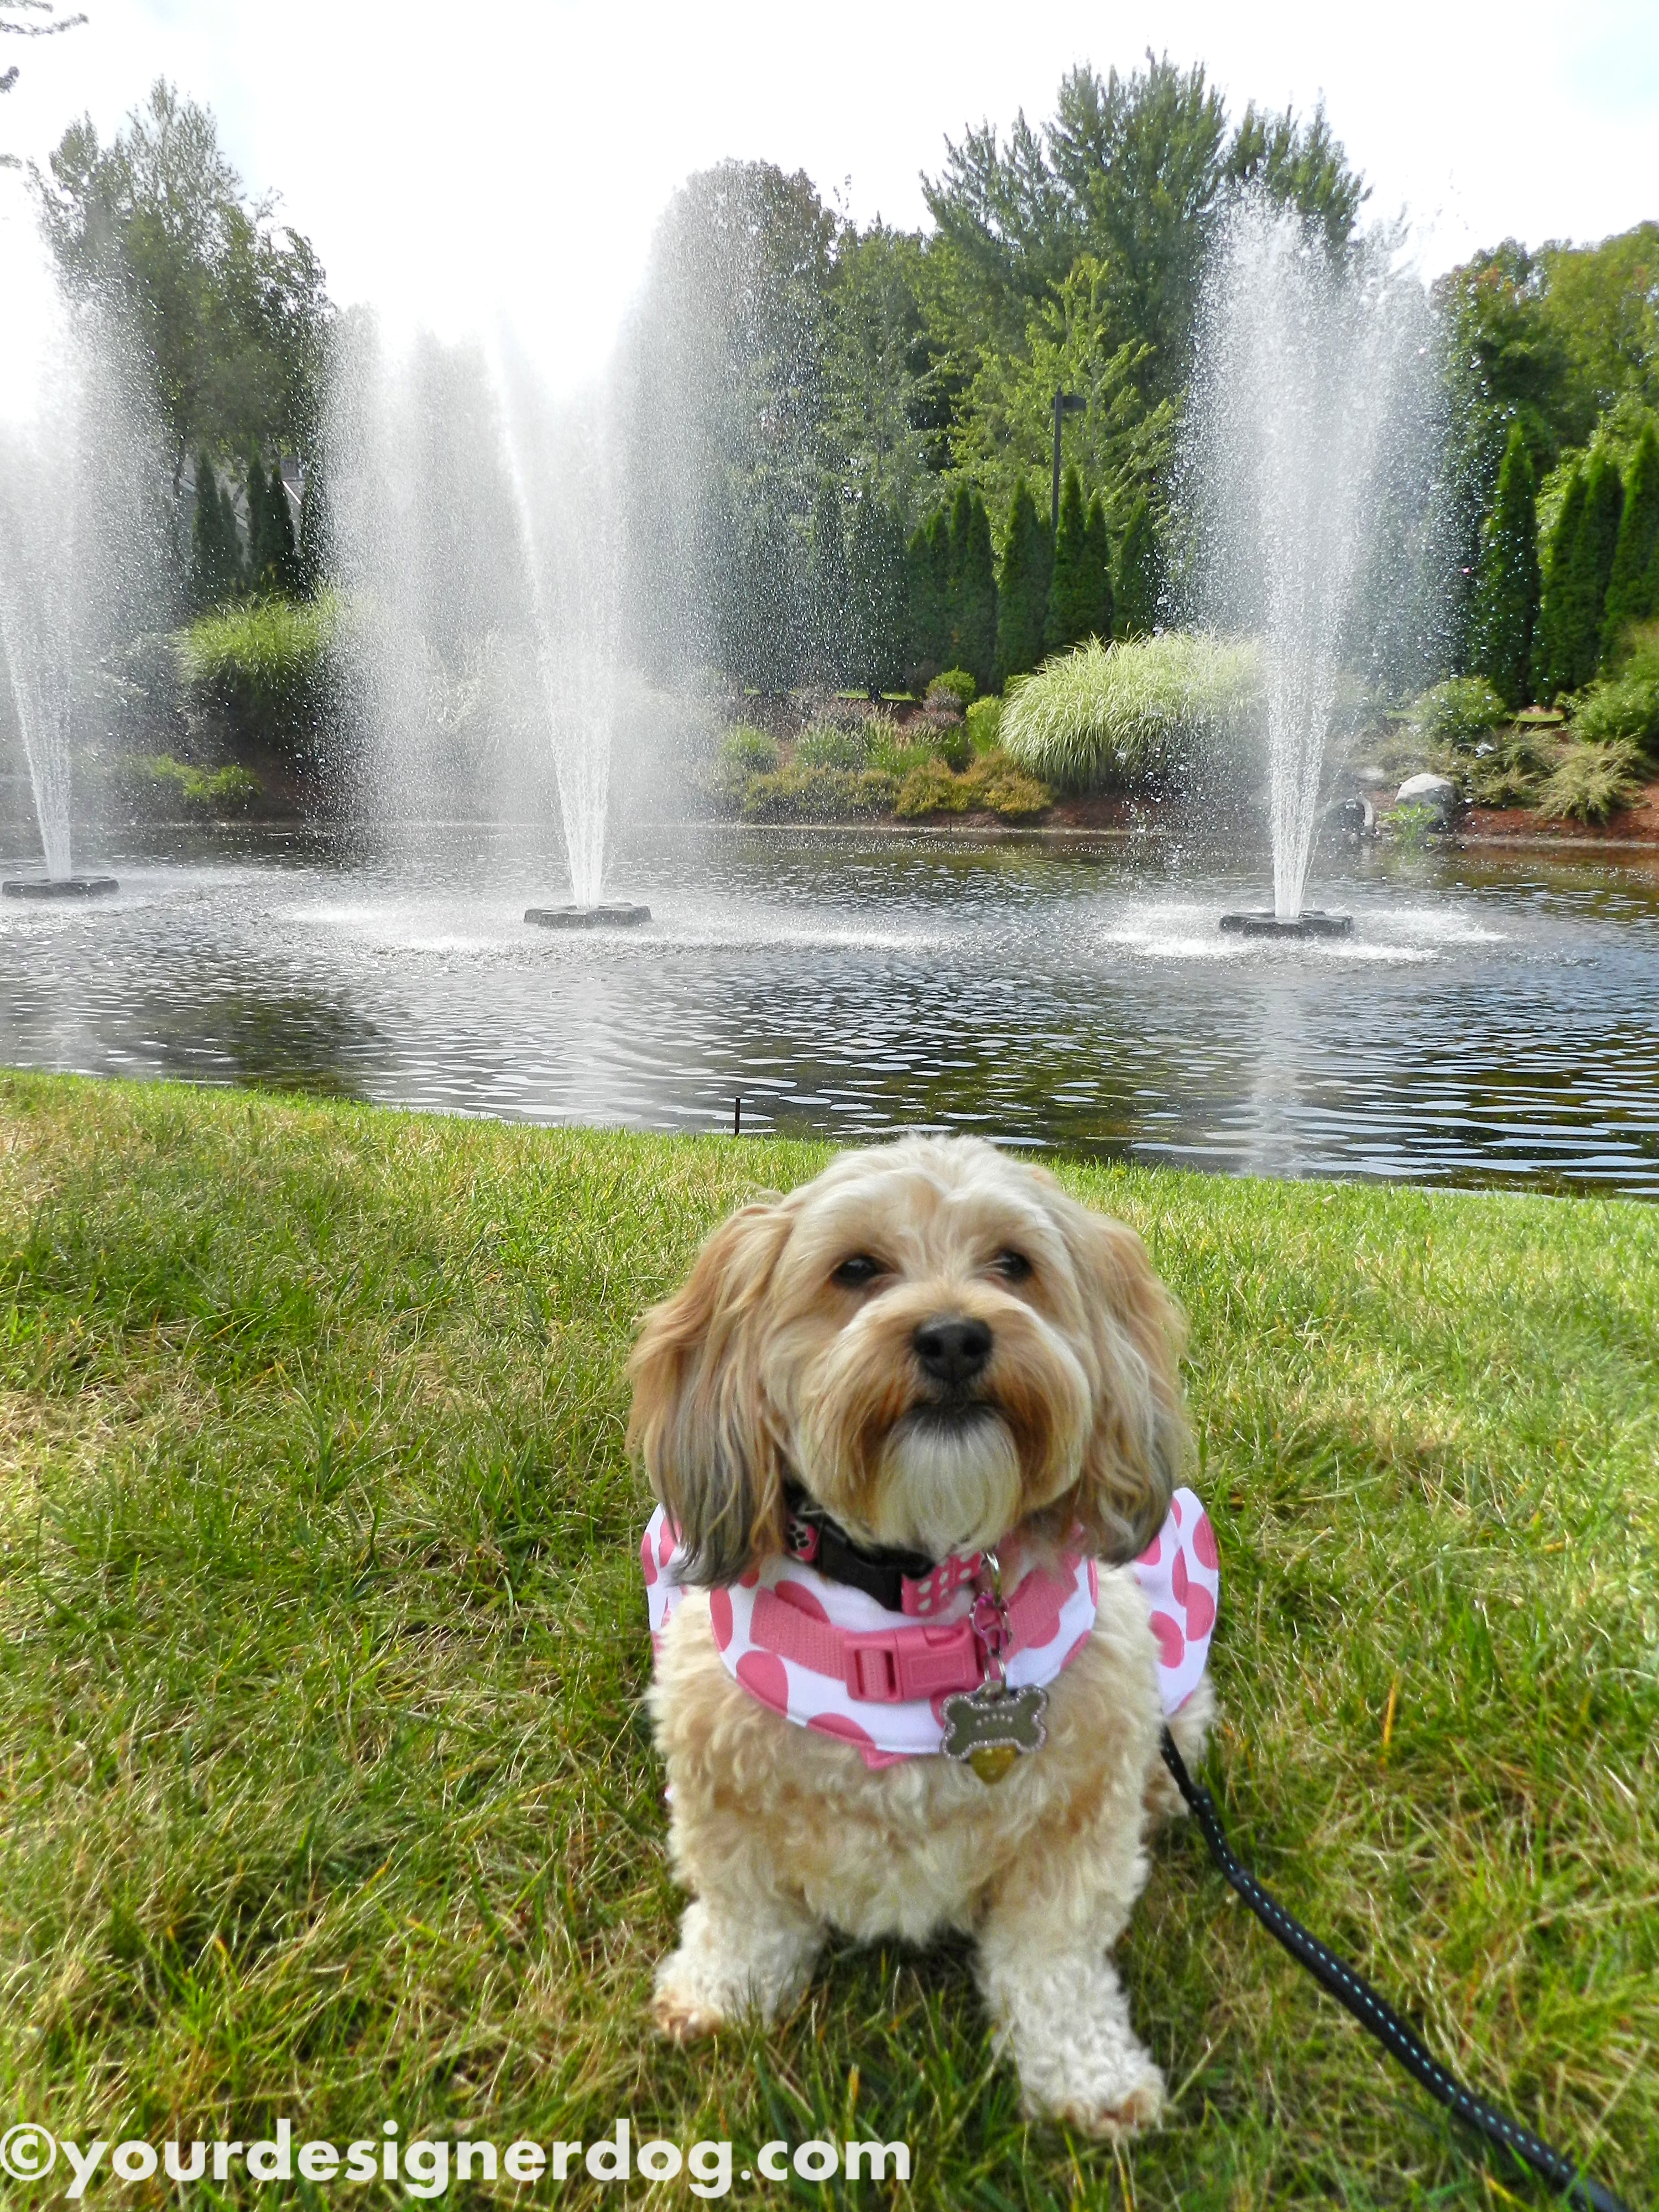 dogs, designer dogs, yorkipoo, yorkie poo, water, fountain, dog smiling, tongue out